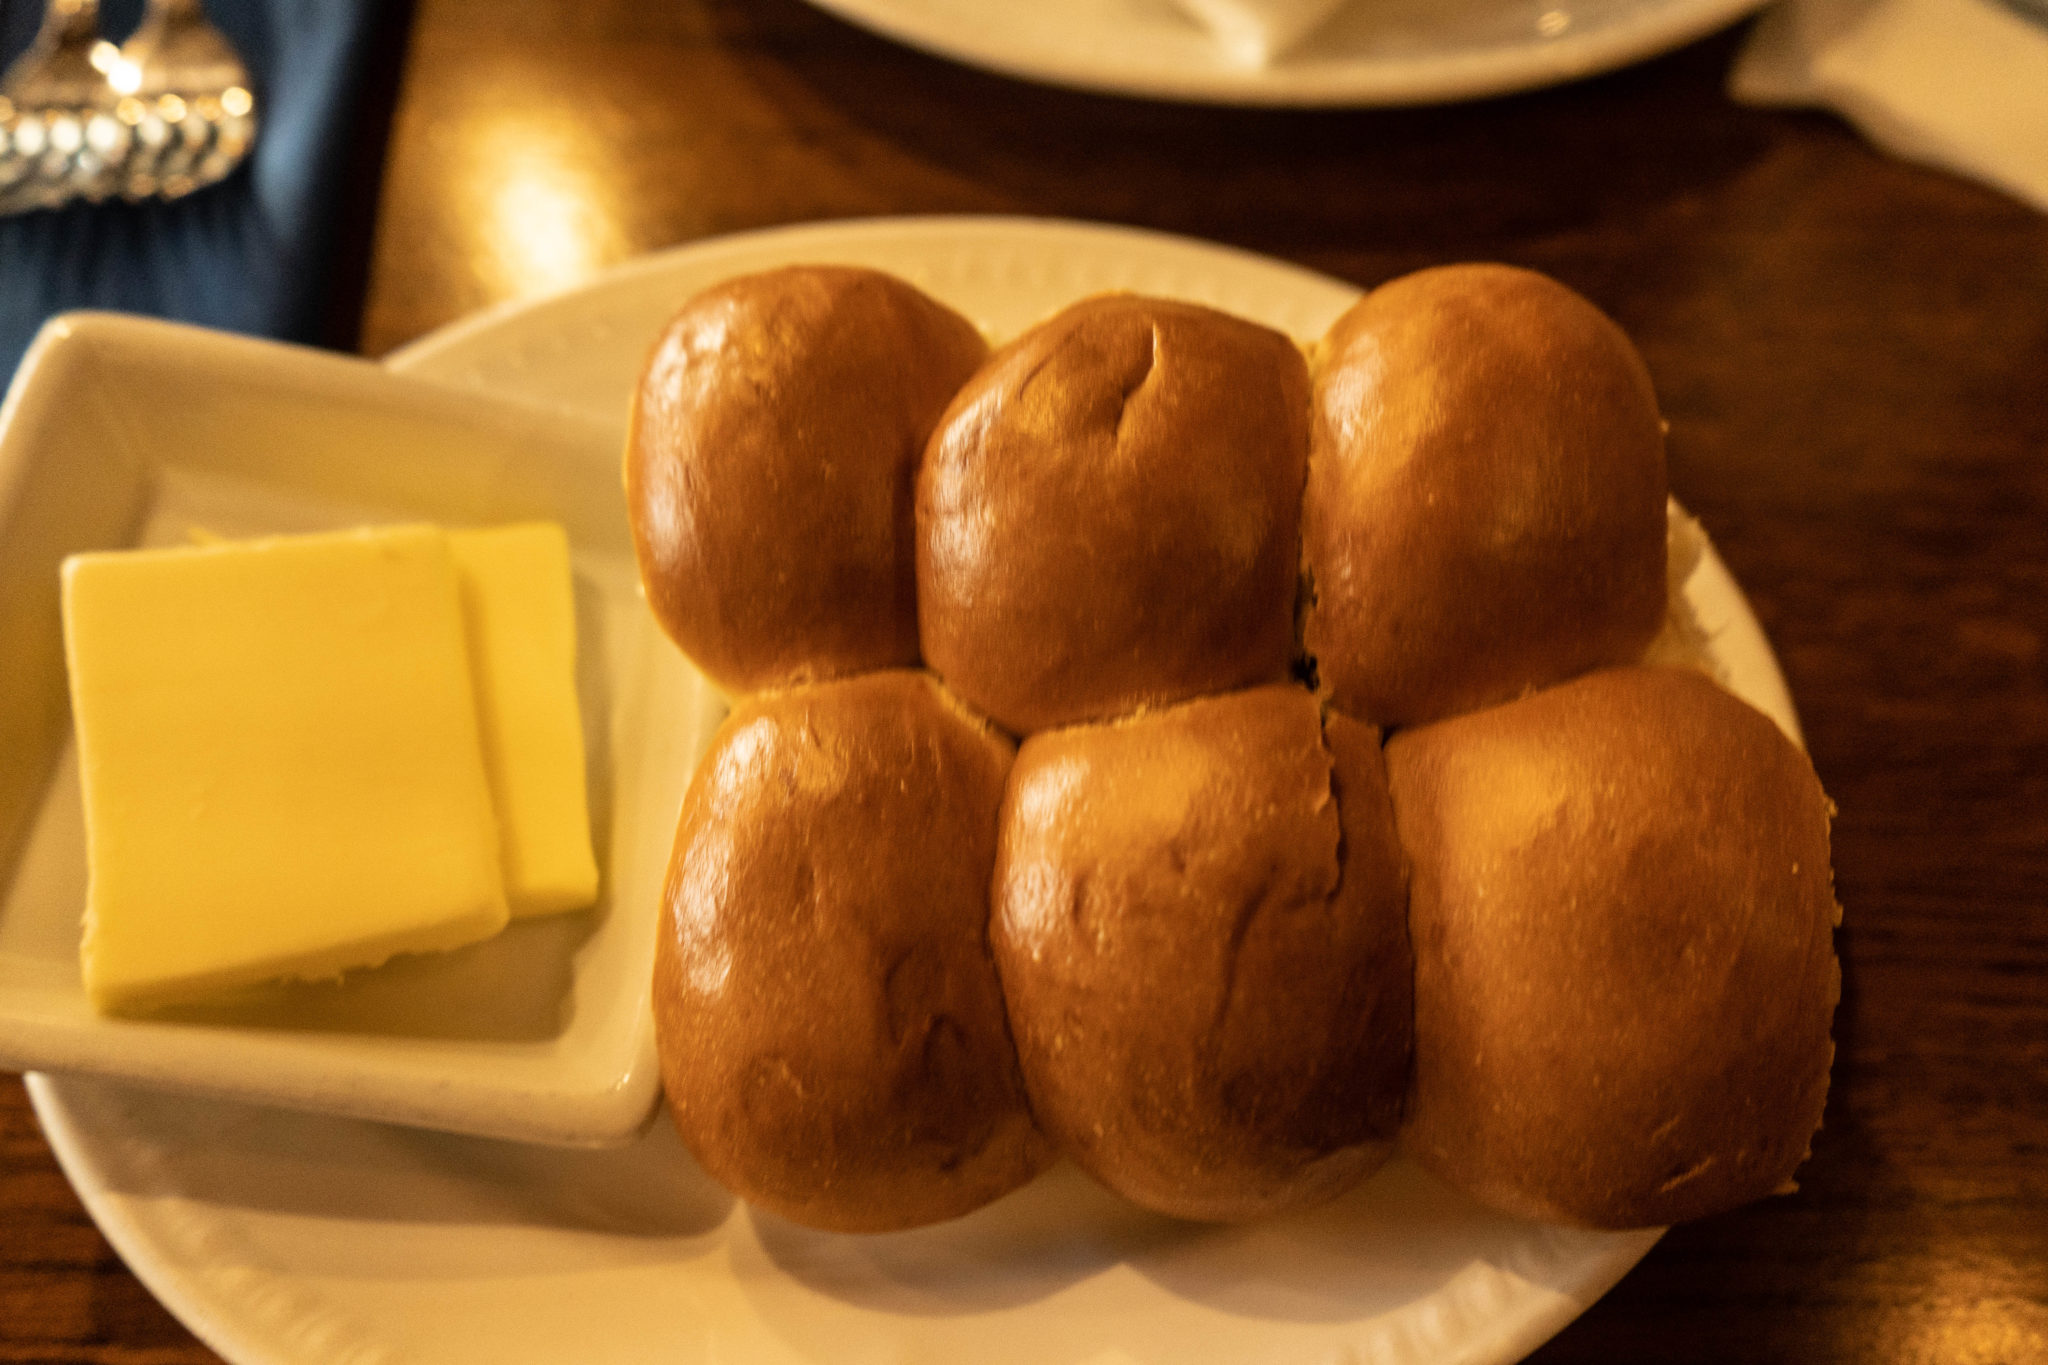 Dinner Bread Rolls and Butter from Liberty Tree Tavern in Disney World